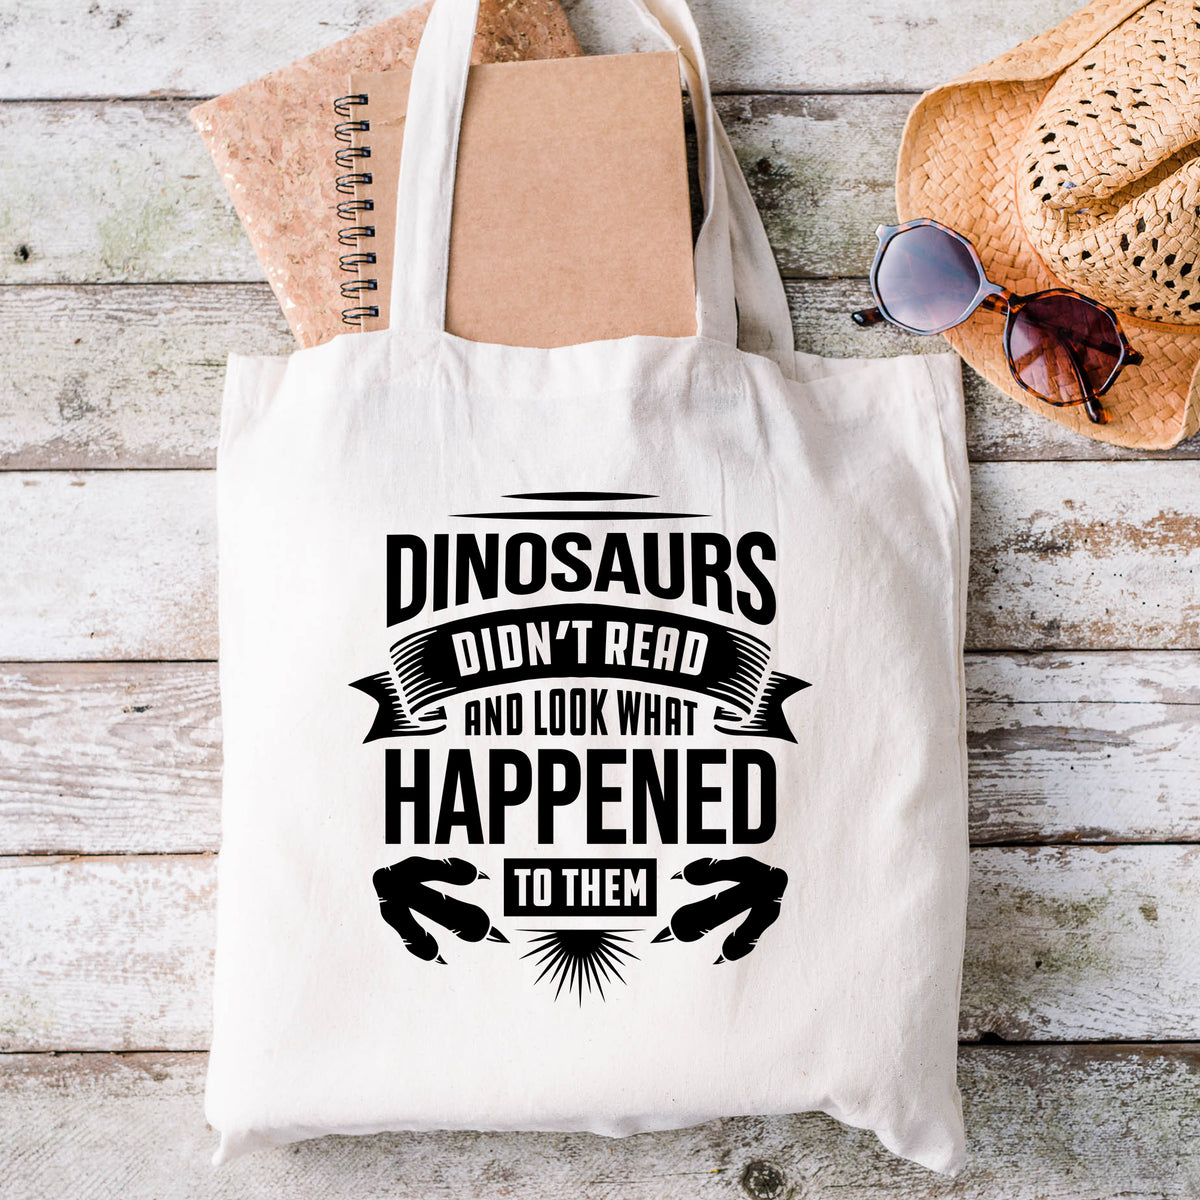 Dinosaurs Didn't Read Book Worm Reading Tote Bag 